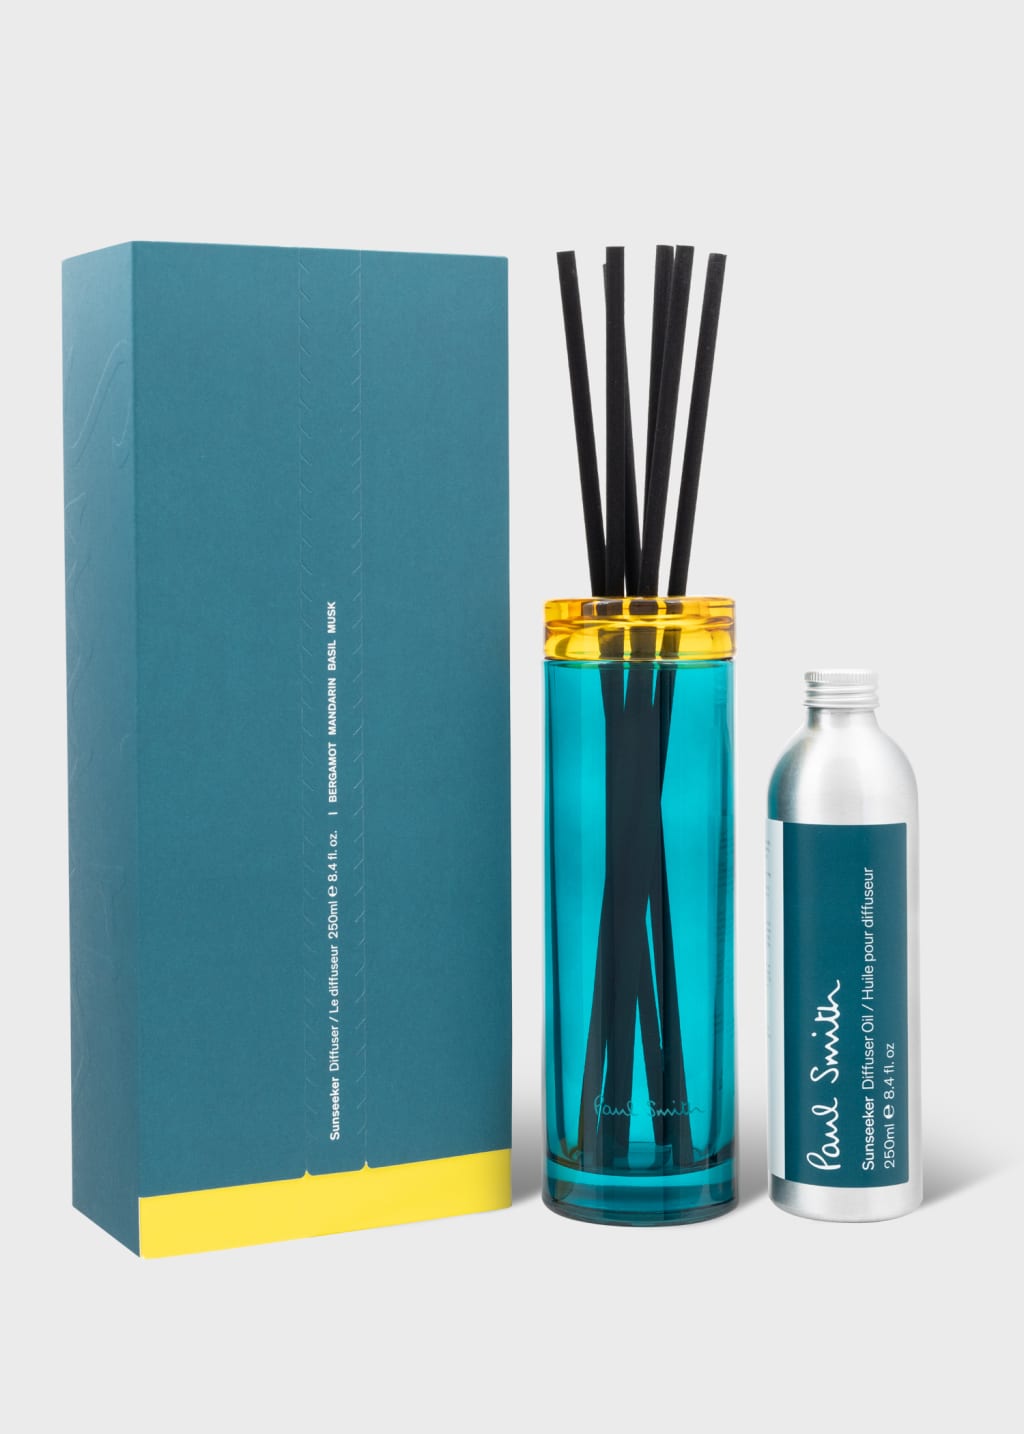 Product View - Paul Smith Sunseeker Diffuser, 250ml Paul Smith